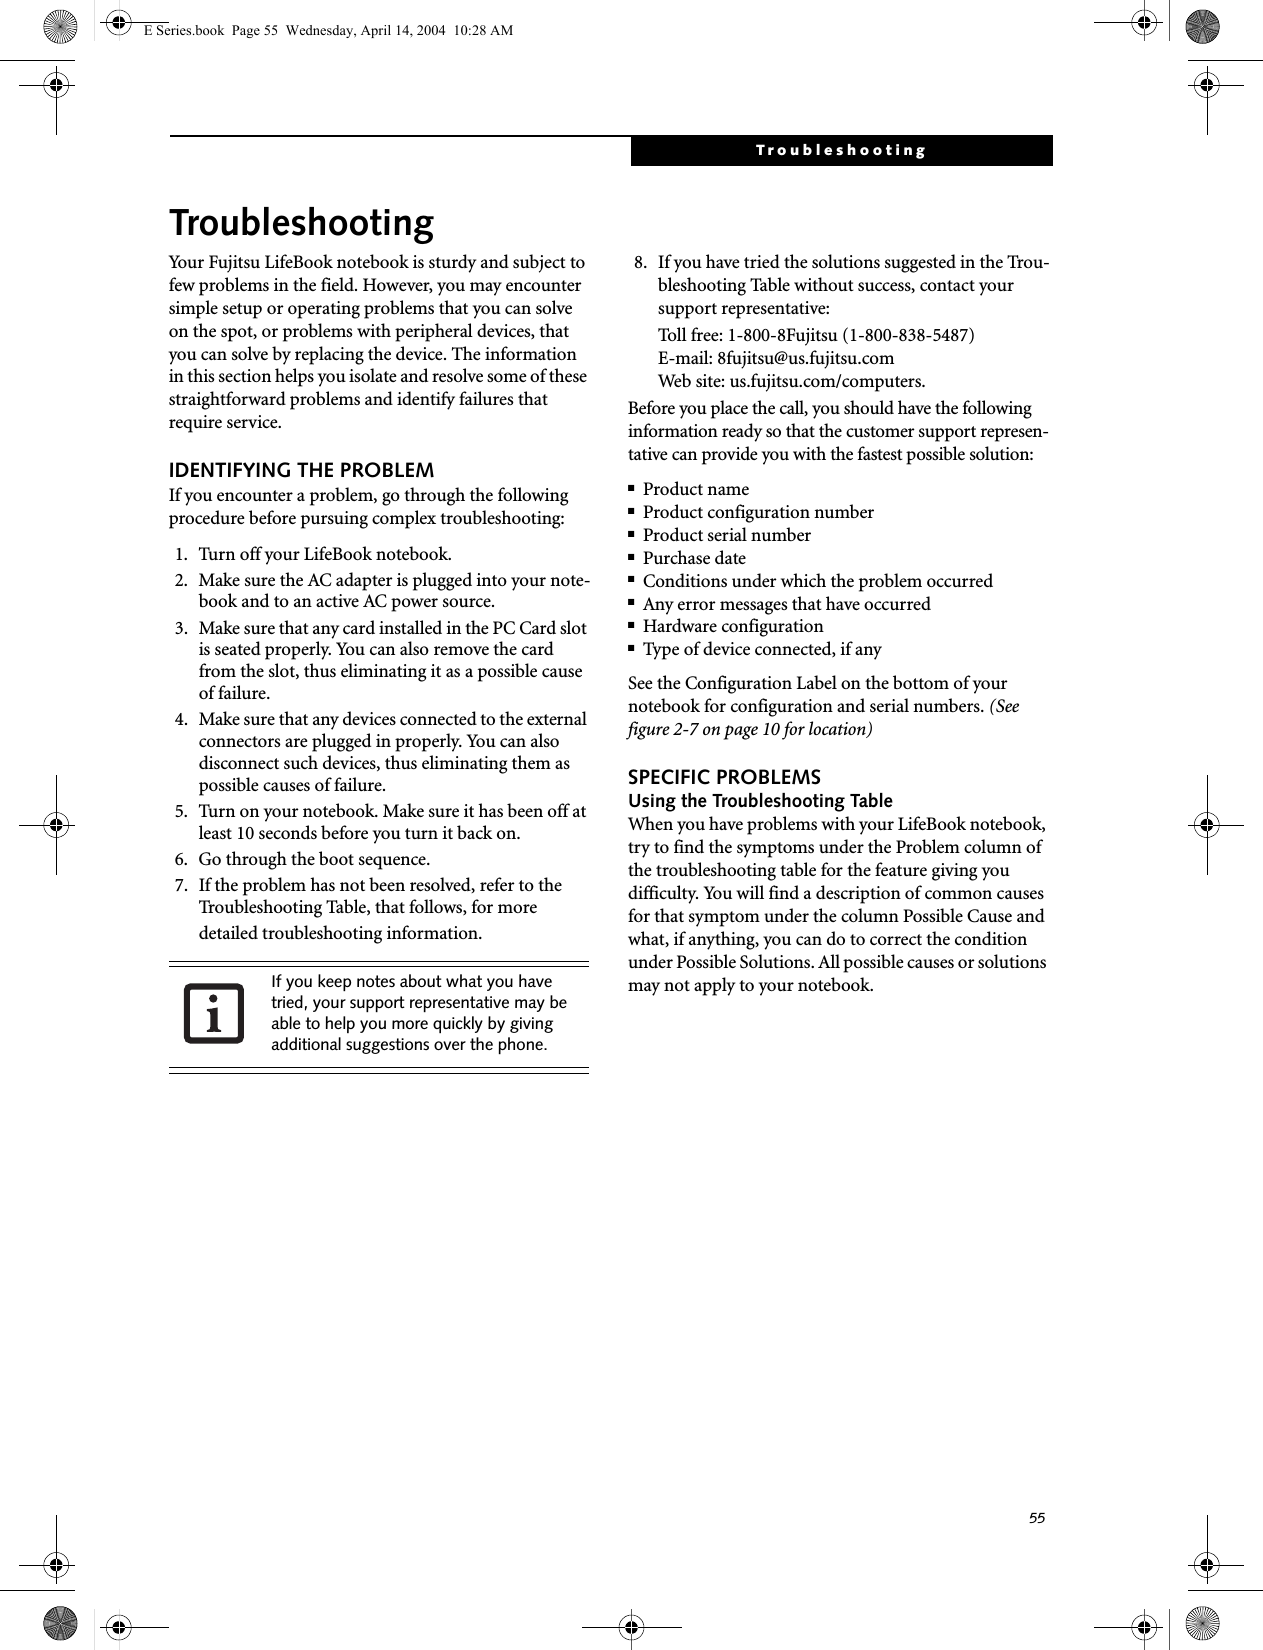 55TroubleshootingTroubleshootingYour Fujitsu LifeBook notebook is sturdy and subject to few problems in the field. However, you may encounter simple setup or operating problems that you can solve on the spot, or problems with peripheral devices, that you can solve by replacing the device. The information in this section helps you isolate and resolve some of these straightforward problems and identify failures that require service.IDENTIFYING THE PROBLEMIf you encounter a problem, go through the following procedure before pursuing complex troubleshooting:1. Turn off your LifeBook notebook.2. Make sure the AC adapter is plugged into your note-book and to an active AC power source.3. Make sure that any card installed in the PC Card slot is seated properly. You can also remove the card from the slot, thus eliminating it as a possible cause of failure.4. Make sure that any devices connected to the external connectors are plugged in properly. You can also disconnect such devices, thus eliminating them as possible causes of failure.5. Turn on your notebook. Make sure it has been off at least 10 seconds before you turn it back on.6. Go through the boot sequence.7. If the problem has not been resolved, refer to the Troubleshooting Table, that follows, for more detailed troubleshooting information. 8. If you have tried the solutions suggested in the Trou-bleshooting Table without success, contact your support representative: Toll free: 1-800-8Fujitsu (1-800-838-5487) E-mail: 8fujitsu@us.fujitsu.com Web site: us.fujitsu.com/computers.Before you place the call, you should have the following information ready so that the customer support represen-tative can provide you with the fastest possible solution:■Product name■Product configuration number■Product serial number■Purchase date■Conditions under which the problem occurred■Any error messages that have occurred■Hardware configuration■Type of device connected, if anySee the Configuration Label on the bottom of yournotebook for configuration and serial numbers. (See figure 2-7 on page 10 for location)SPECIFIC PROBLEMSUsing the Troubleshooting TableWhen you have problems with your LifeBook notebook, try to find the symptoms under the Problem column of the troubleshooting table for the feature giving you difficulty. You will find a description of common causes for that symptom under the column Possible Cause and what, if anything, you can do to correct the condition under Possible Solutions. All possible causes or solutions may not apply to your notebook.If you keep notes about what you have tried, your support representative may be able to help you more quickly by giving additional suggestions over the phone.E Series.book  Page 55  Wednesday, April 14, 2004  10:28 AM